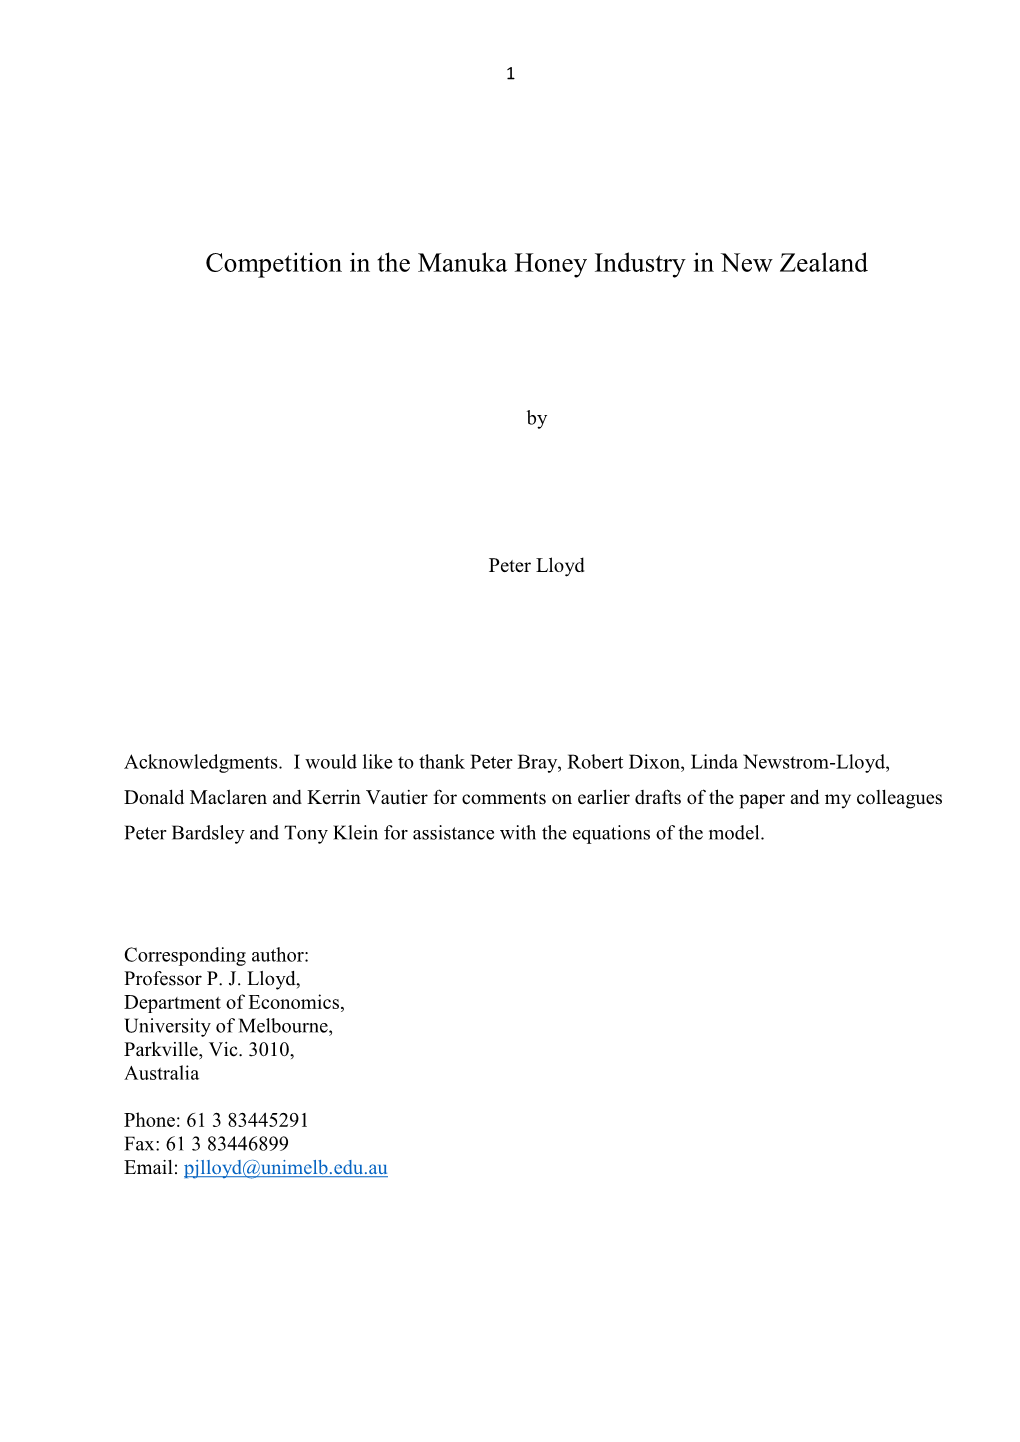 Competition in the Manuka Honey Industry in New Zealand